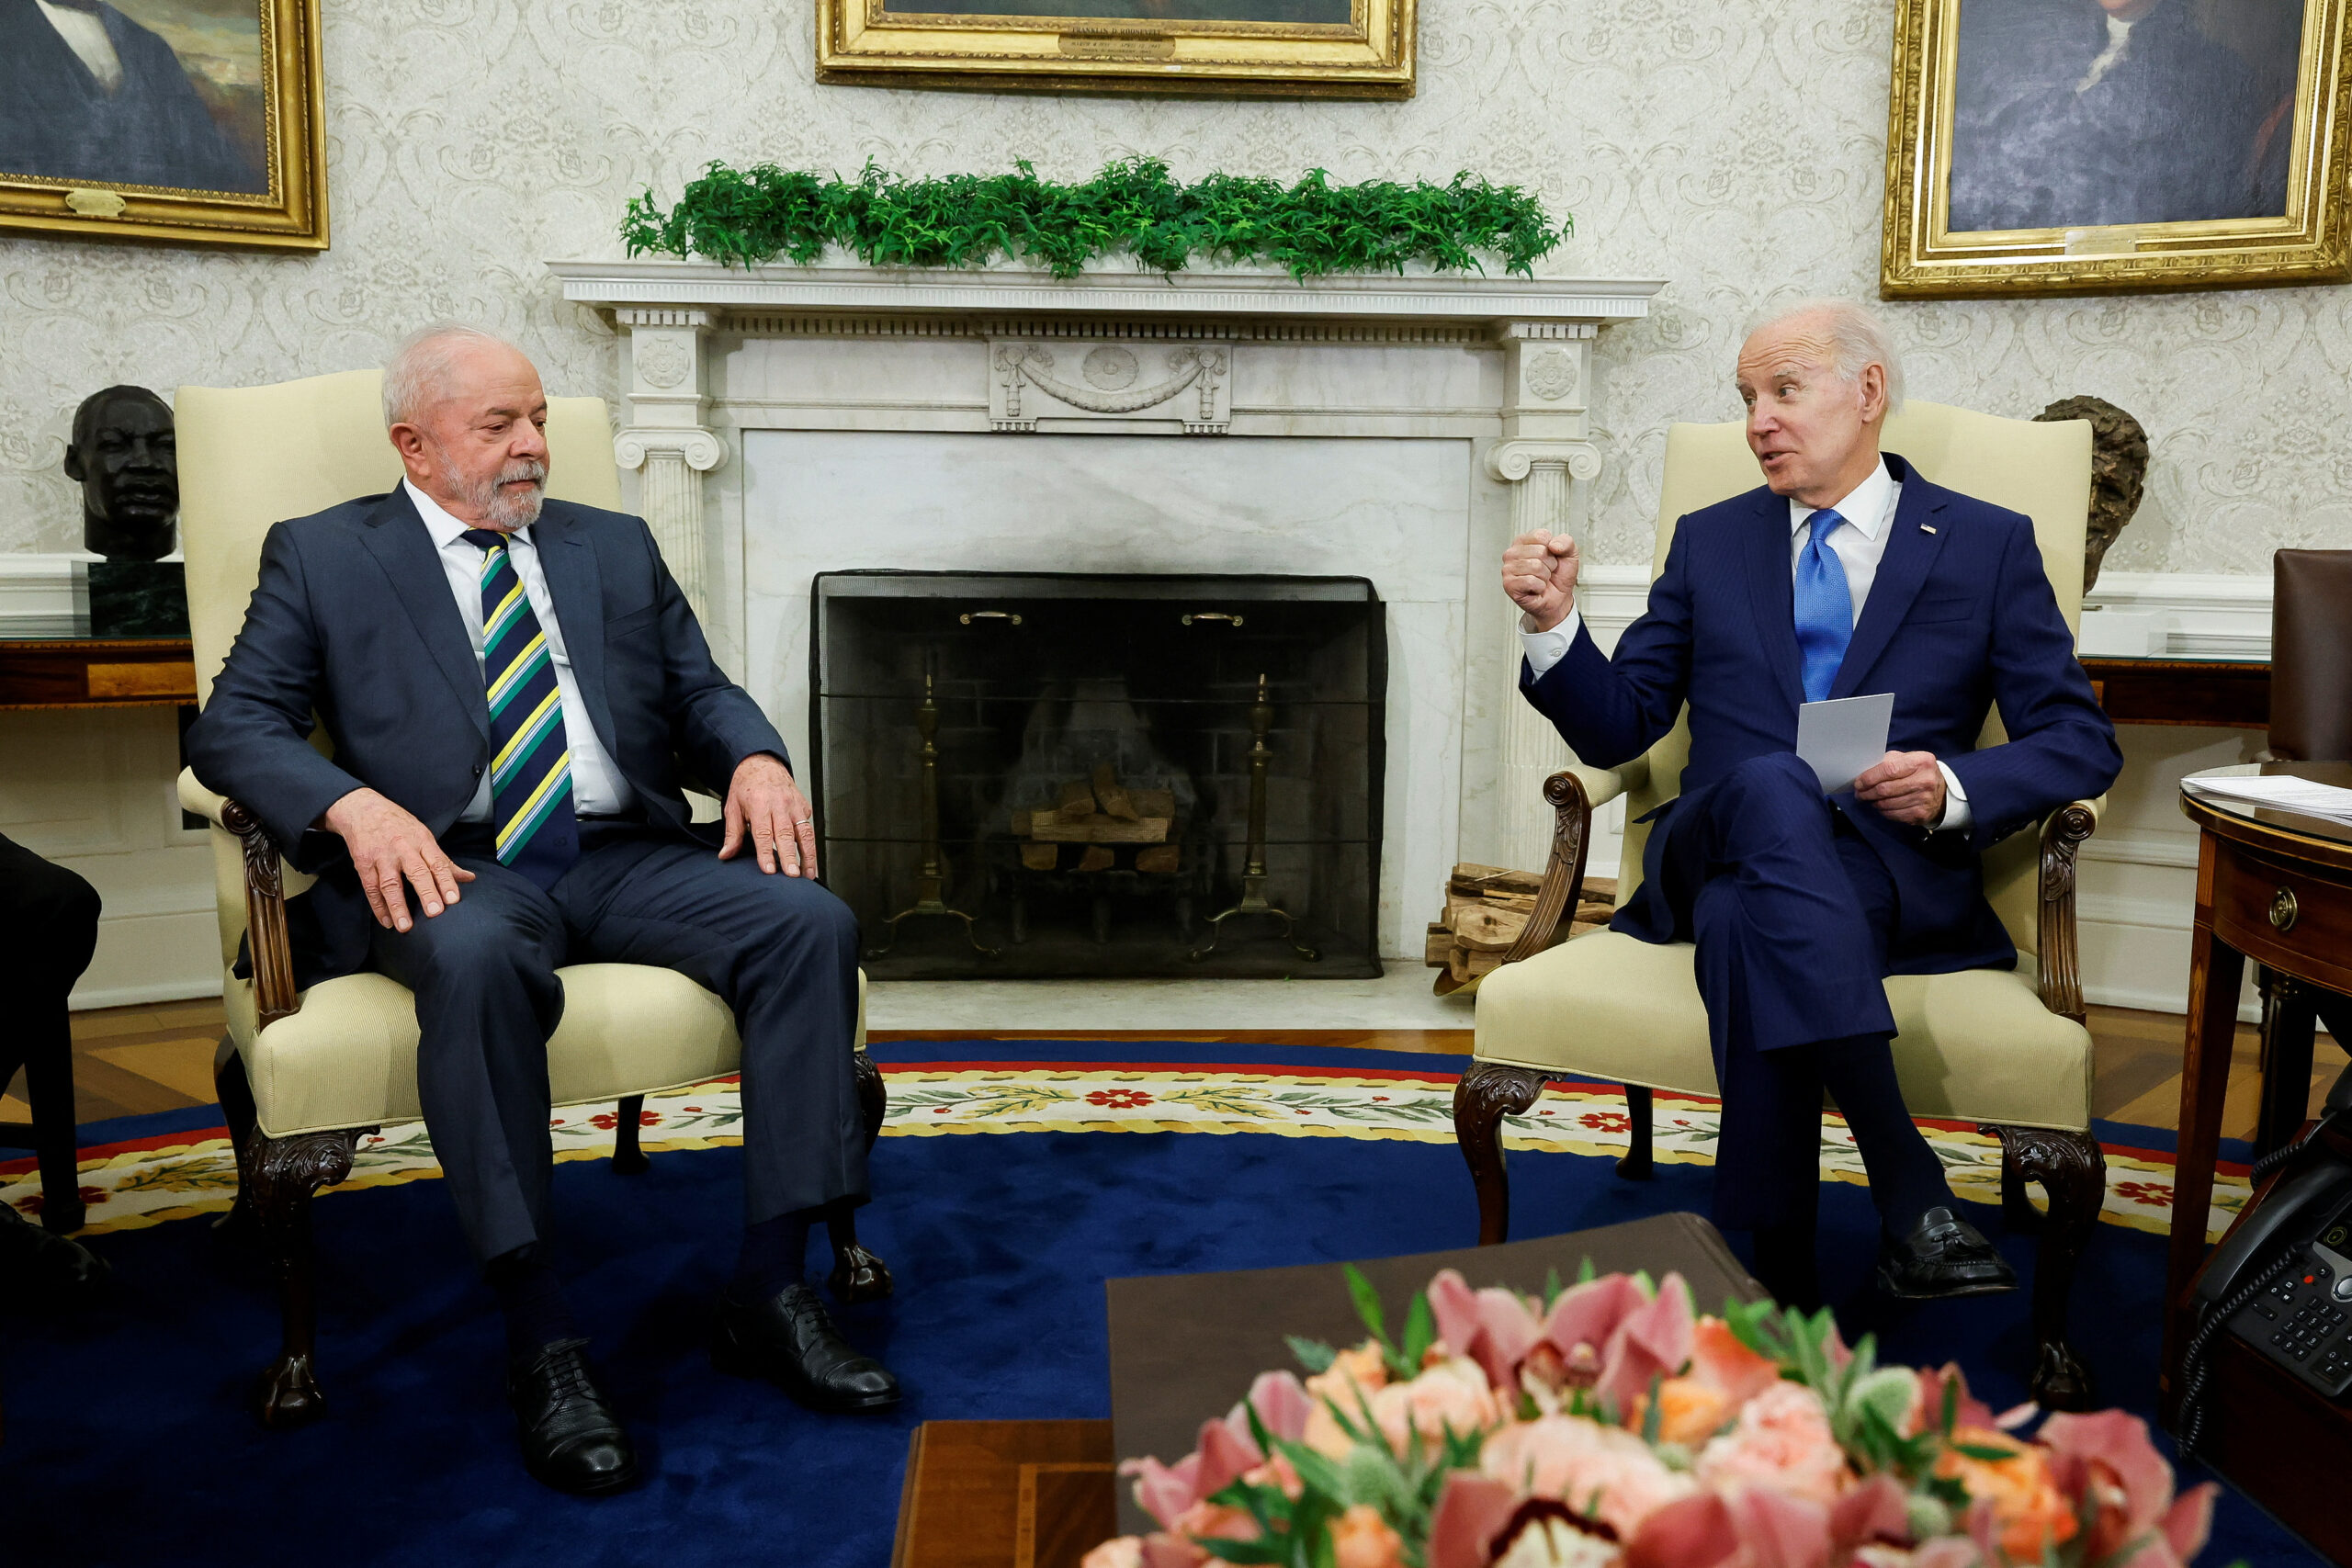 Lula and Biden meet in Washington and pledge to "stand united" to protect democracy